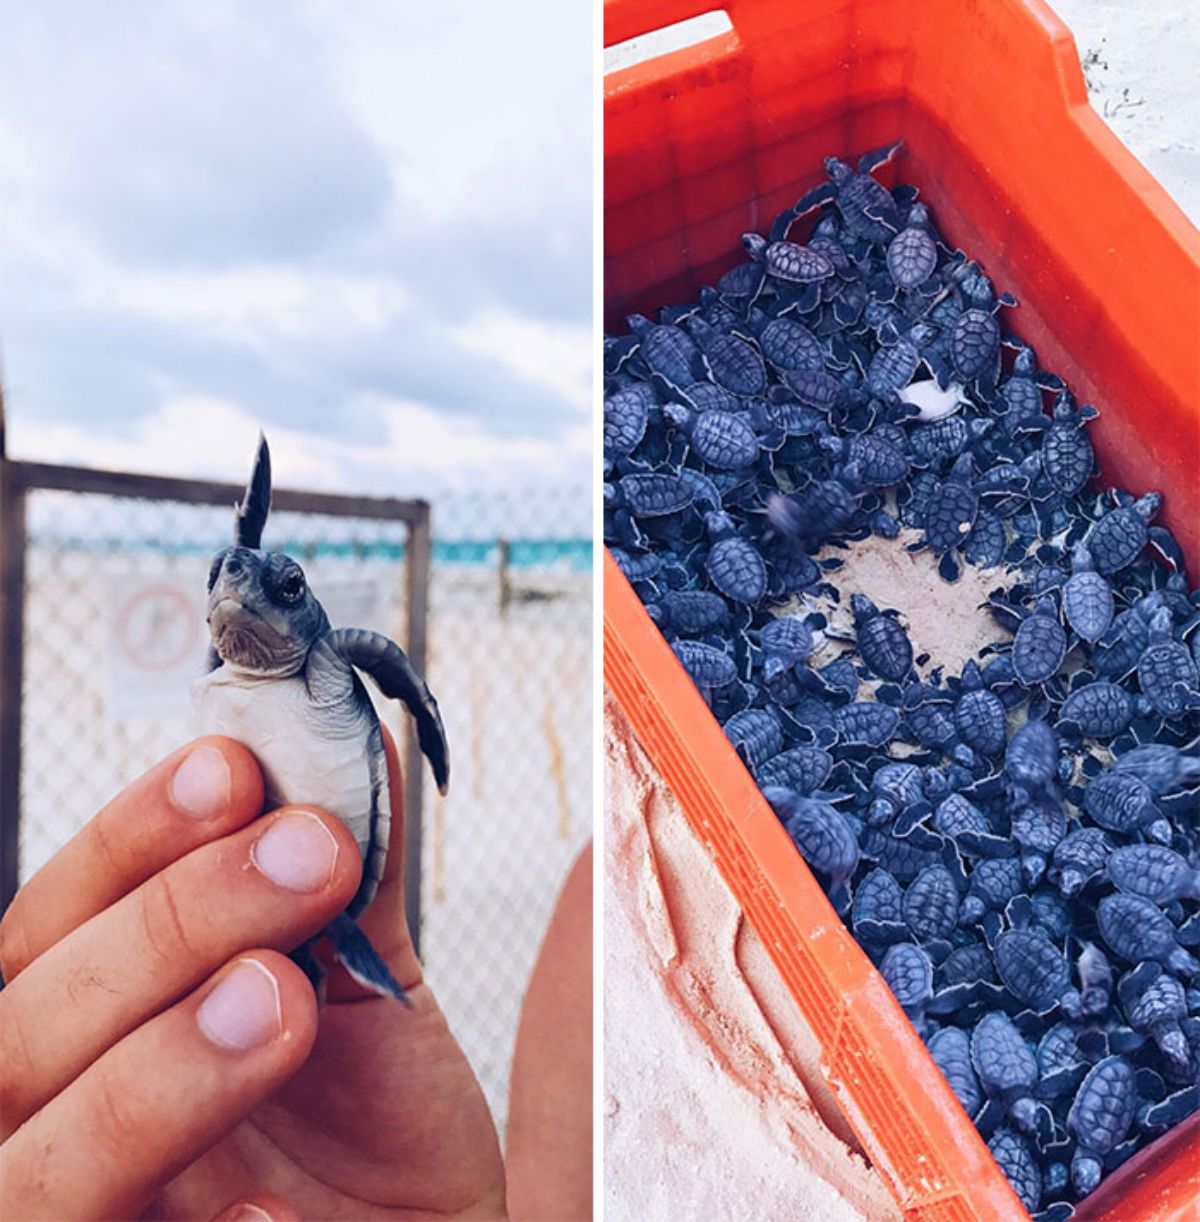 2 photos of a baby sea turtle being held in someone's hand and a bunch of them in an orange basket